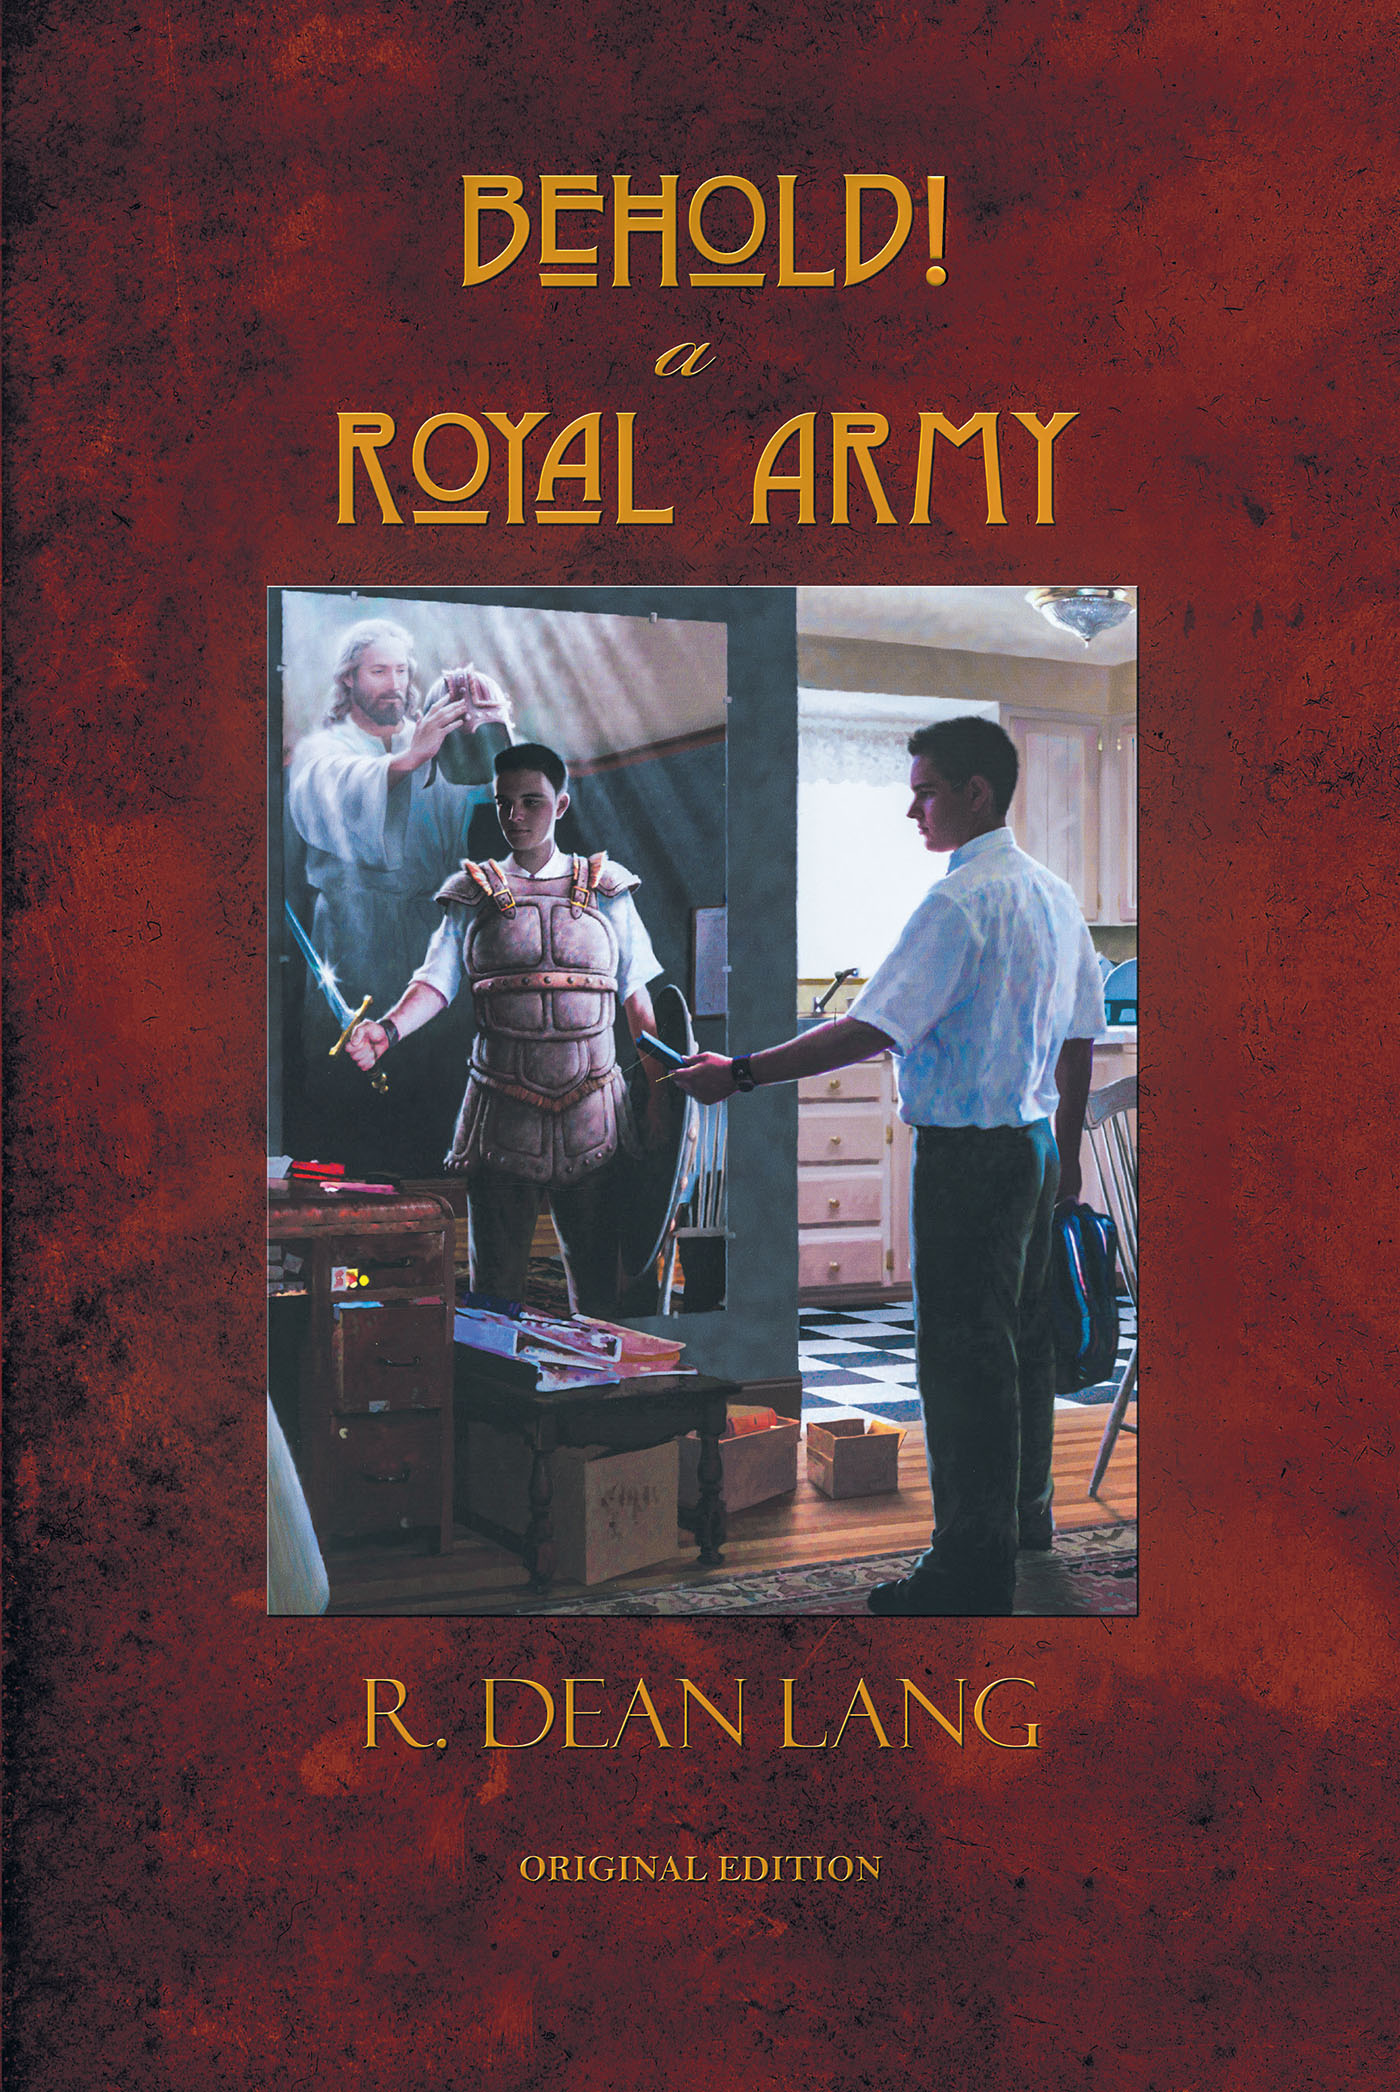 R. Dean Lang’s Newly Released "Behold! A Royal Army" is an Encouraging Message of the Need to Find and Cherish a Relationship with God